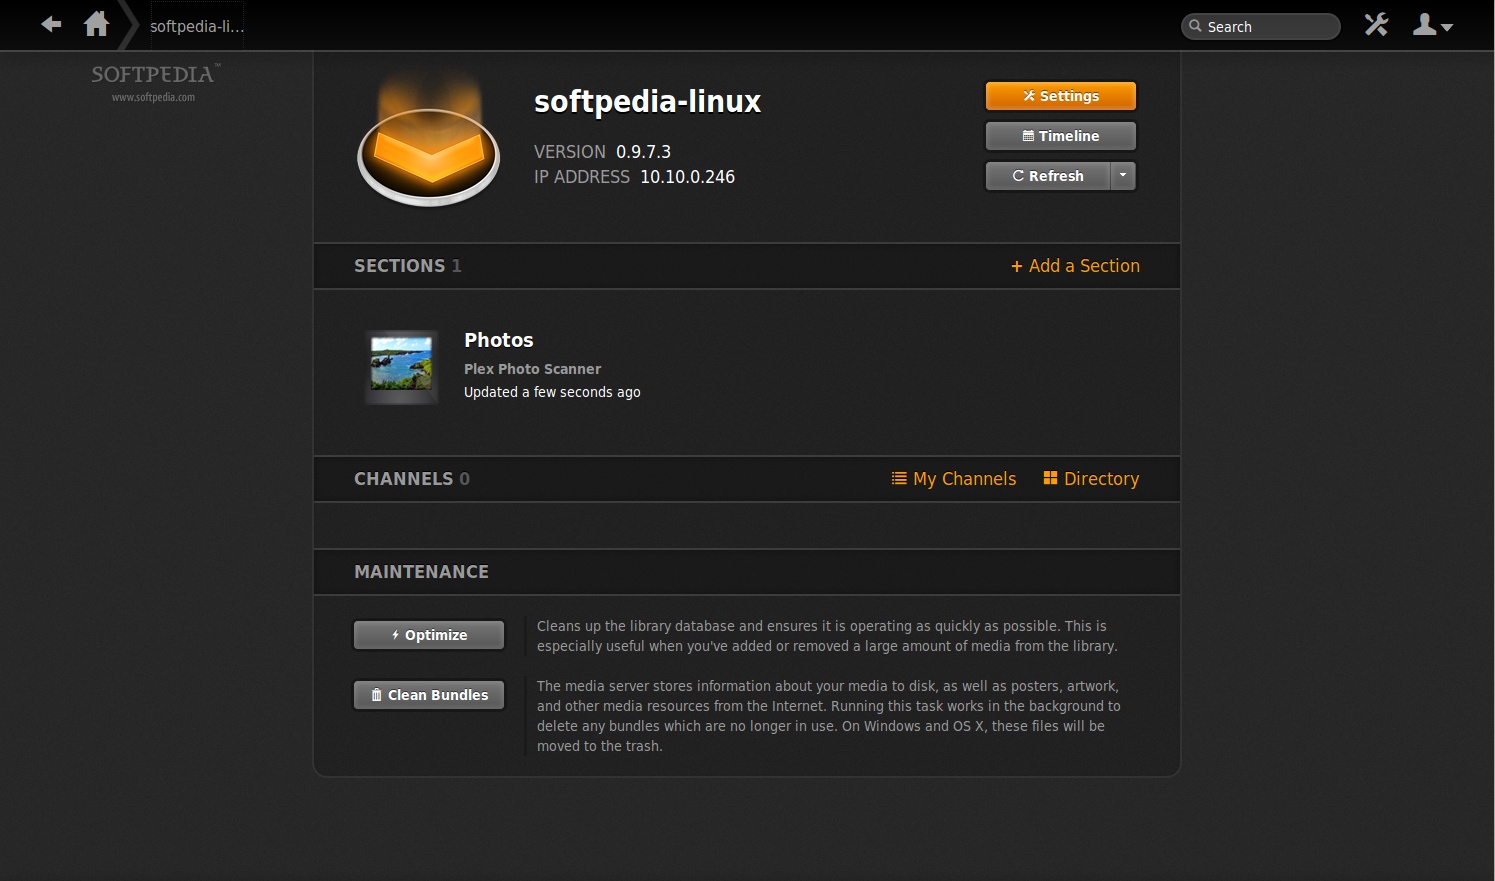 download the last version for android Plex Media Server 1.32.3.7192